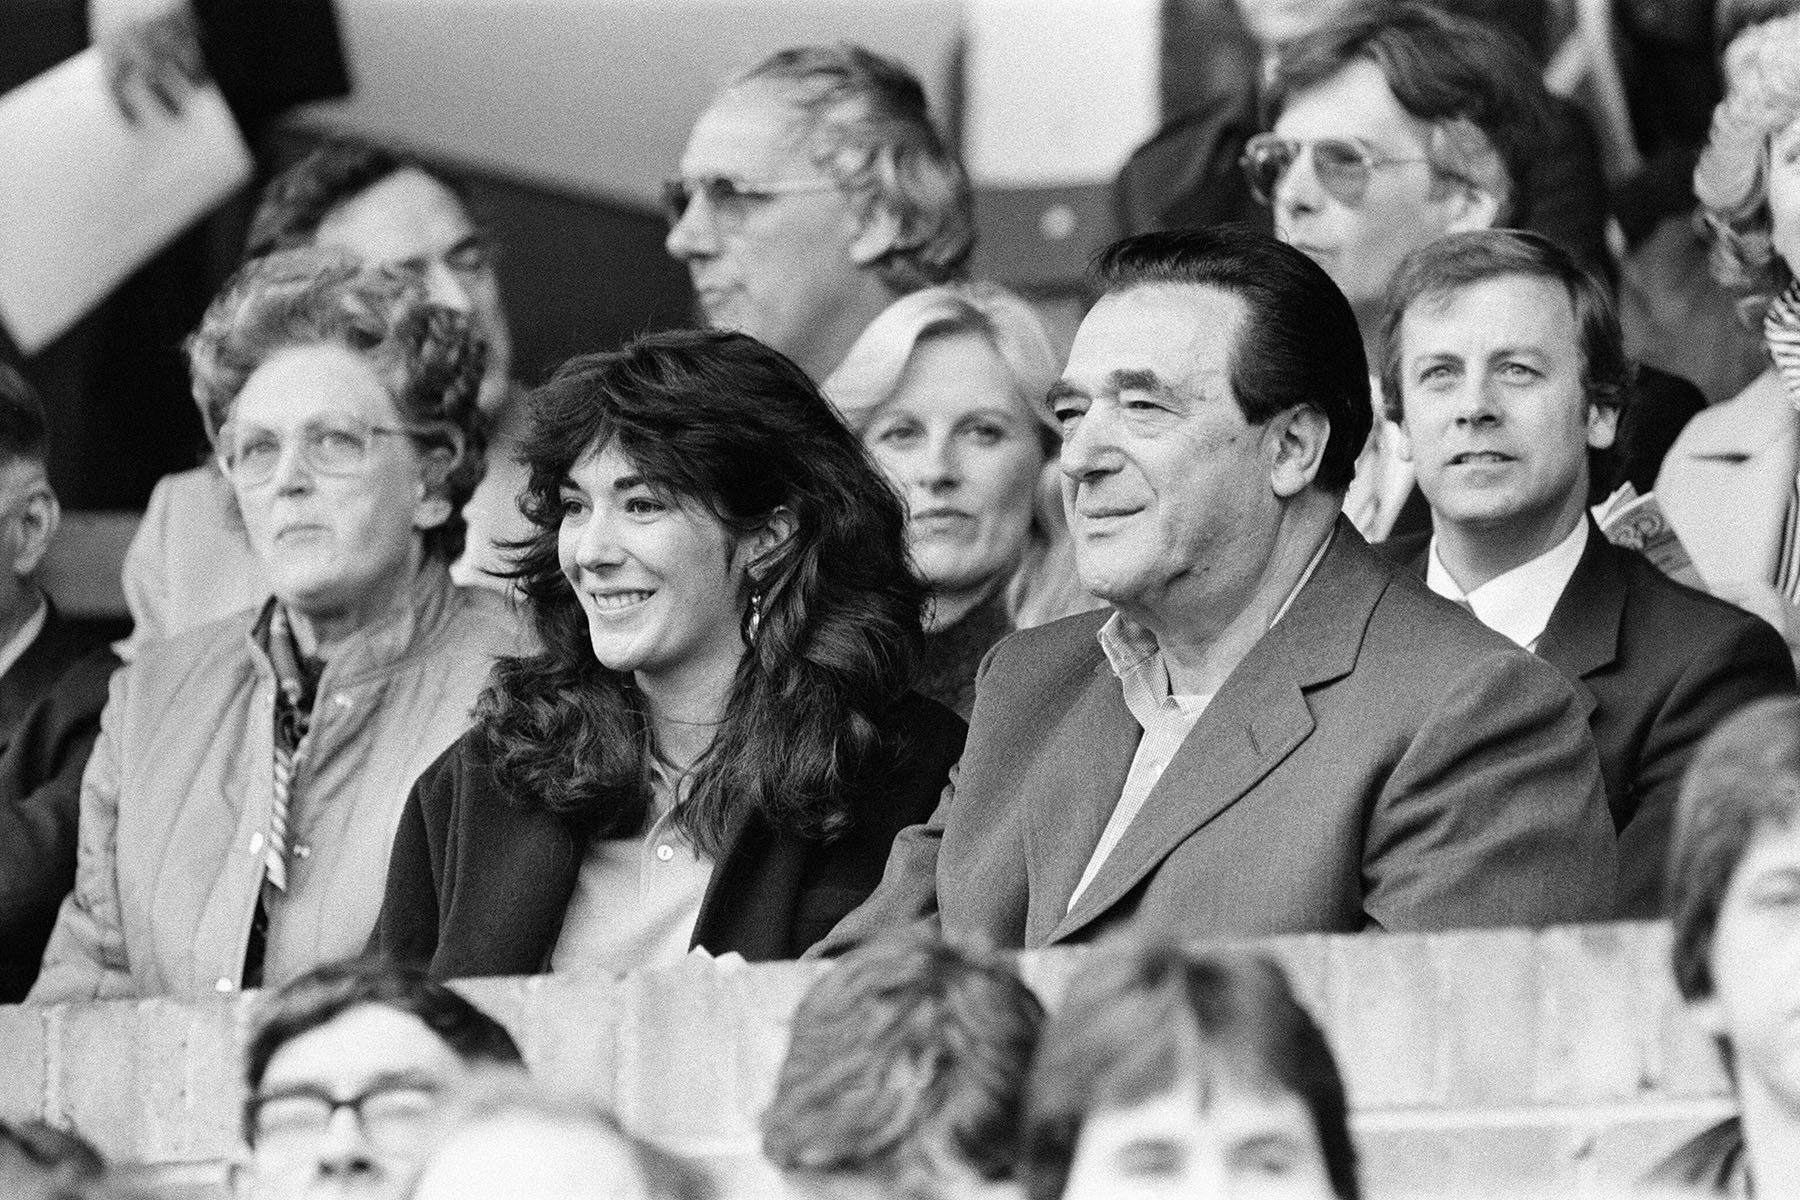 Ghislaine Maxwell and her father watch a soccer match together.